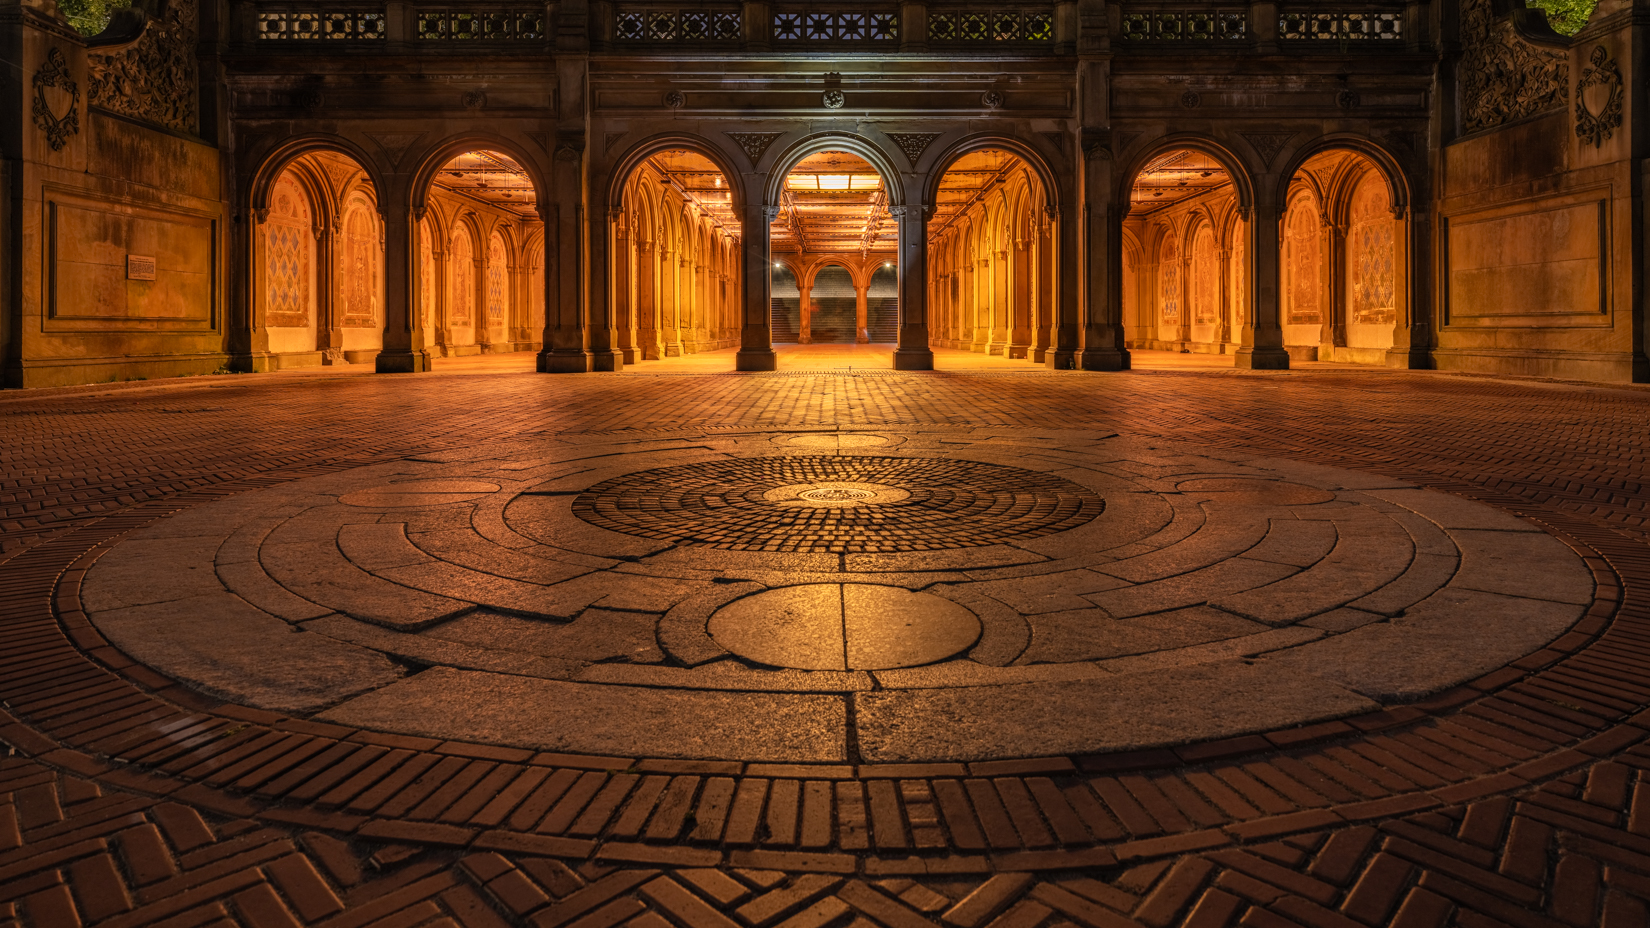 The Bethesda Terrace, emptied of its daily visitors, stands under the cover of midnight. In the silence, each stone and archway...